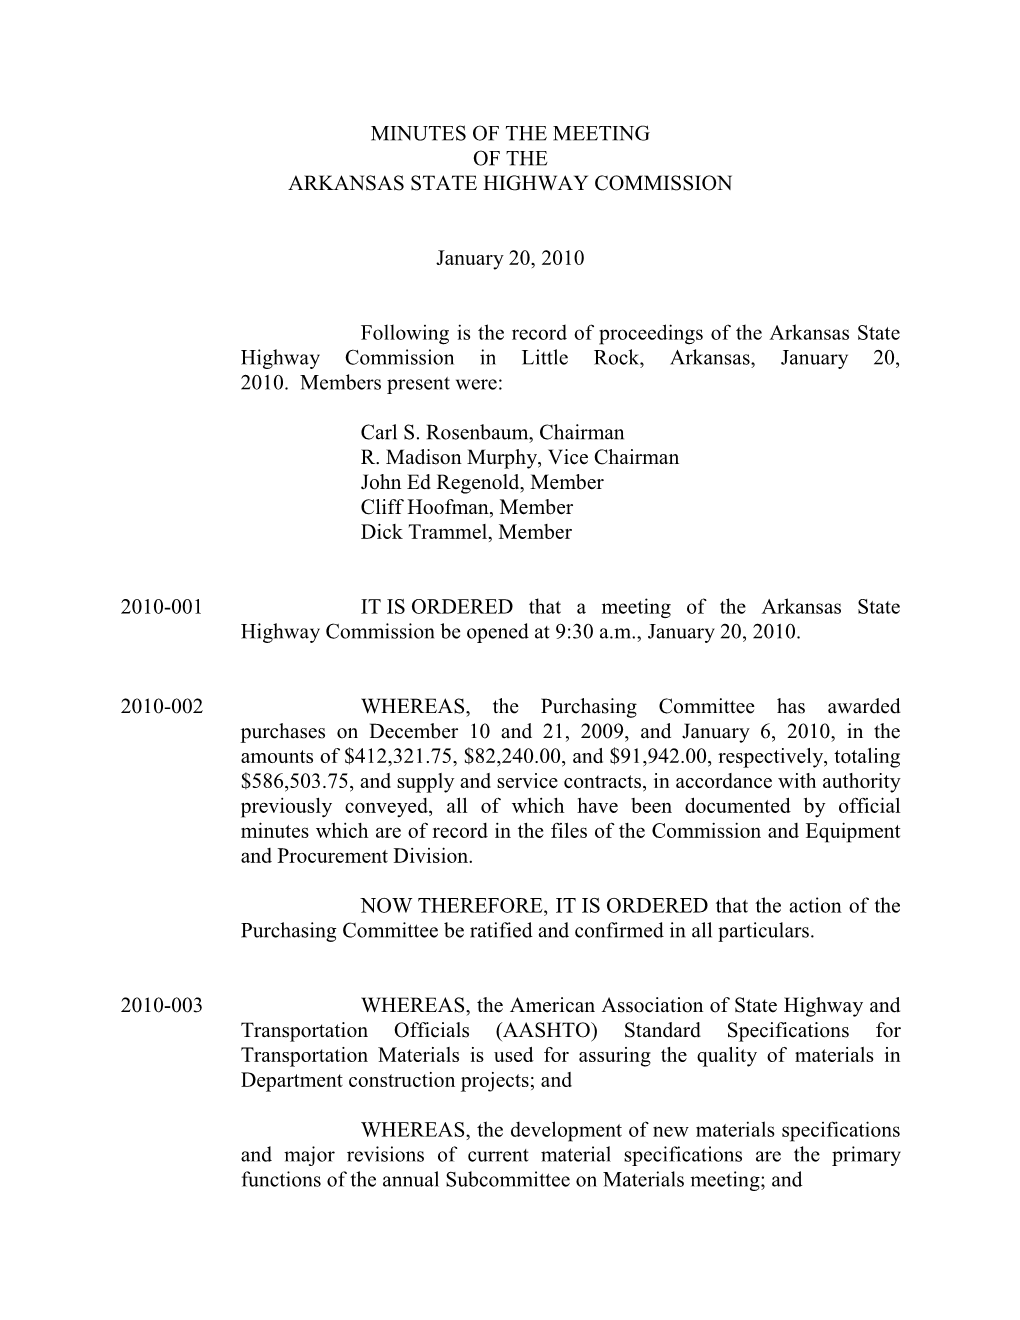 Arkansas State Highway Commission Minutes